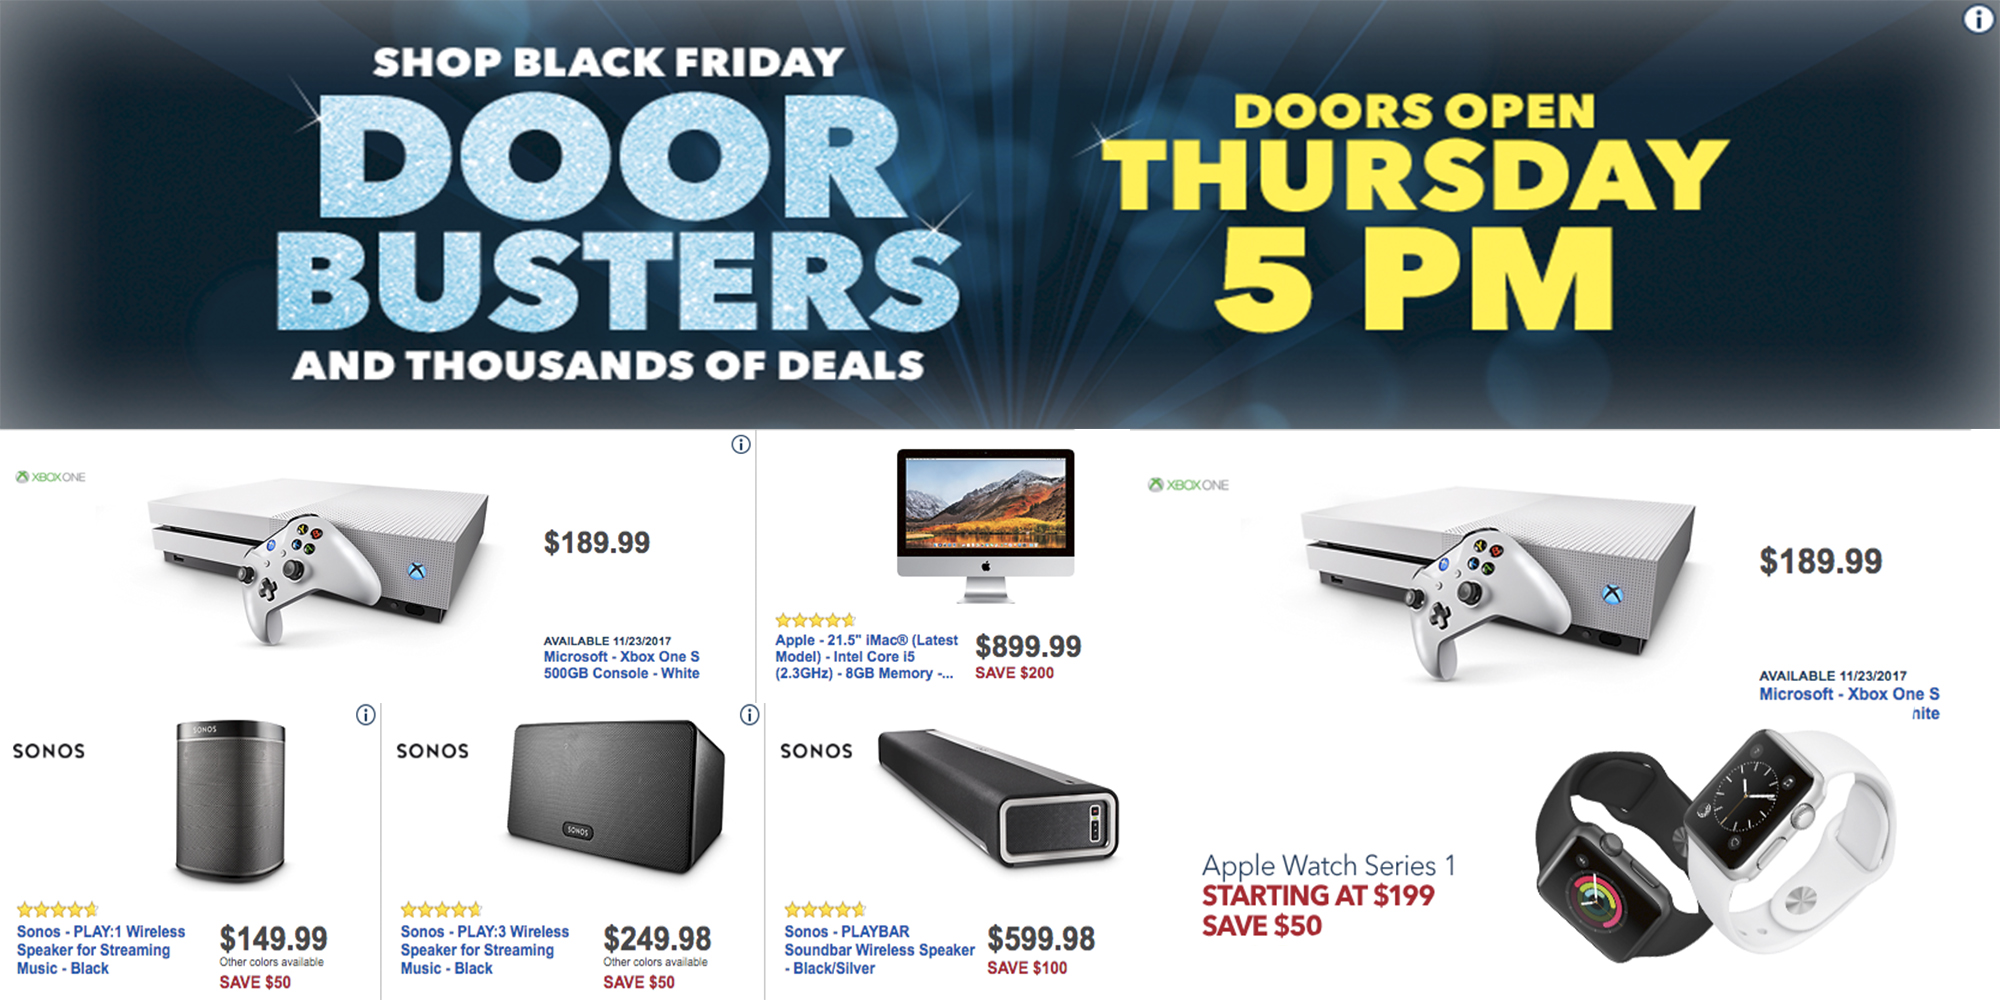 Best Buy's Black Friday 2017 ad hits w/ big Apple discounts, smart home - What Auto Manufactorer Has Black Friday Deals